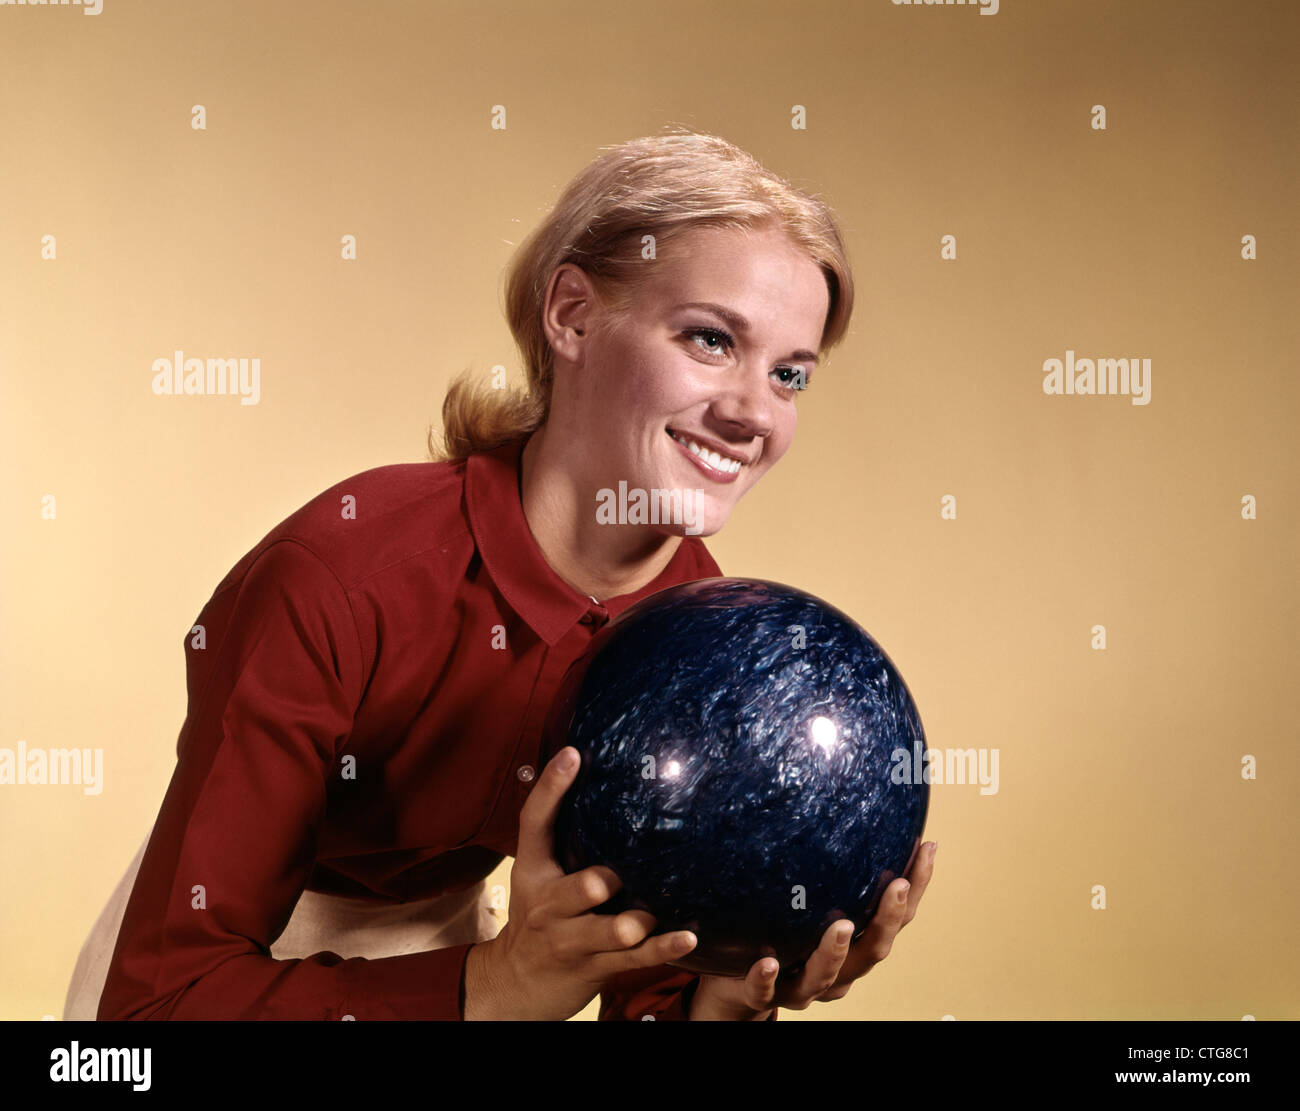 1960s YOUNG SMILING BLONDE WOMAN HOLDING BOWLING BALL WEARING RED SHIRT ABOUT TO BOWL Stock Photo